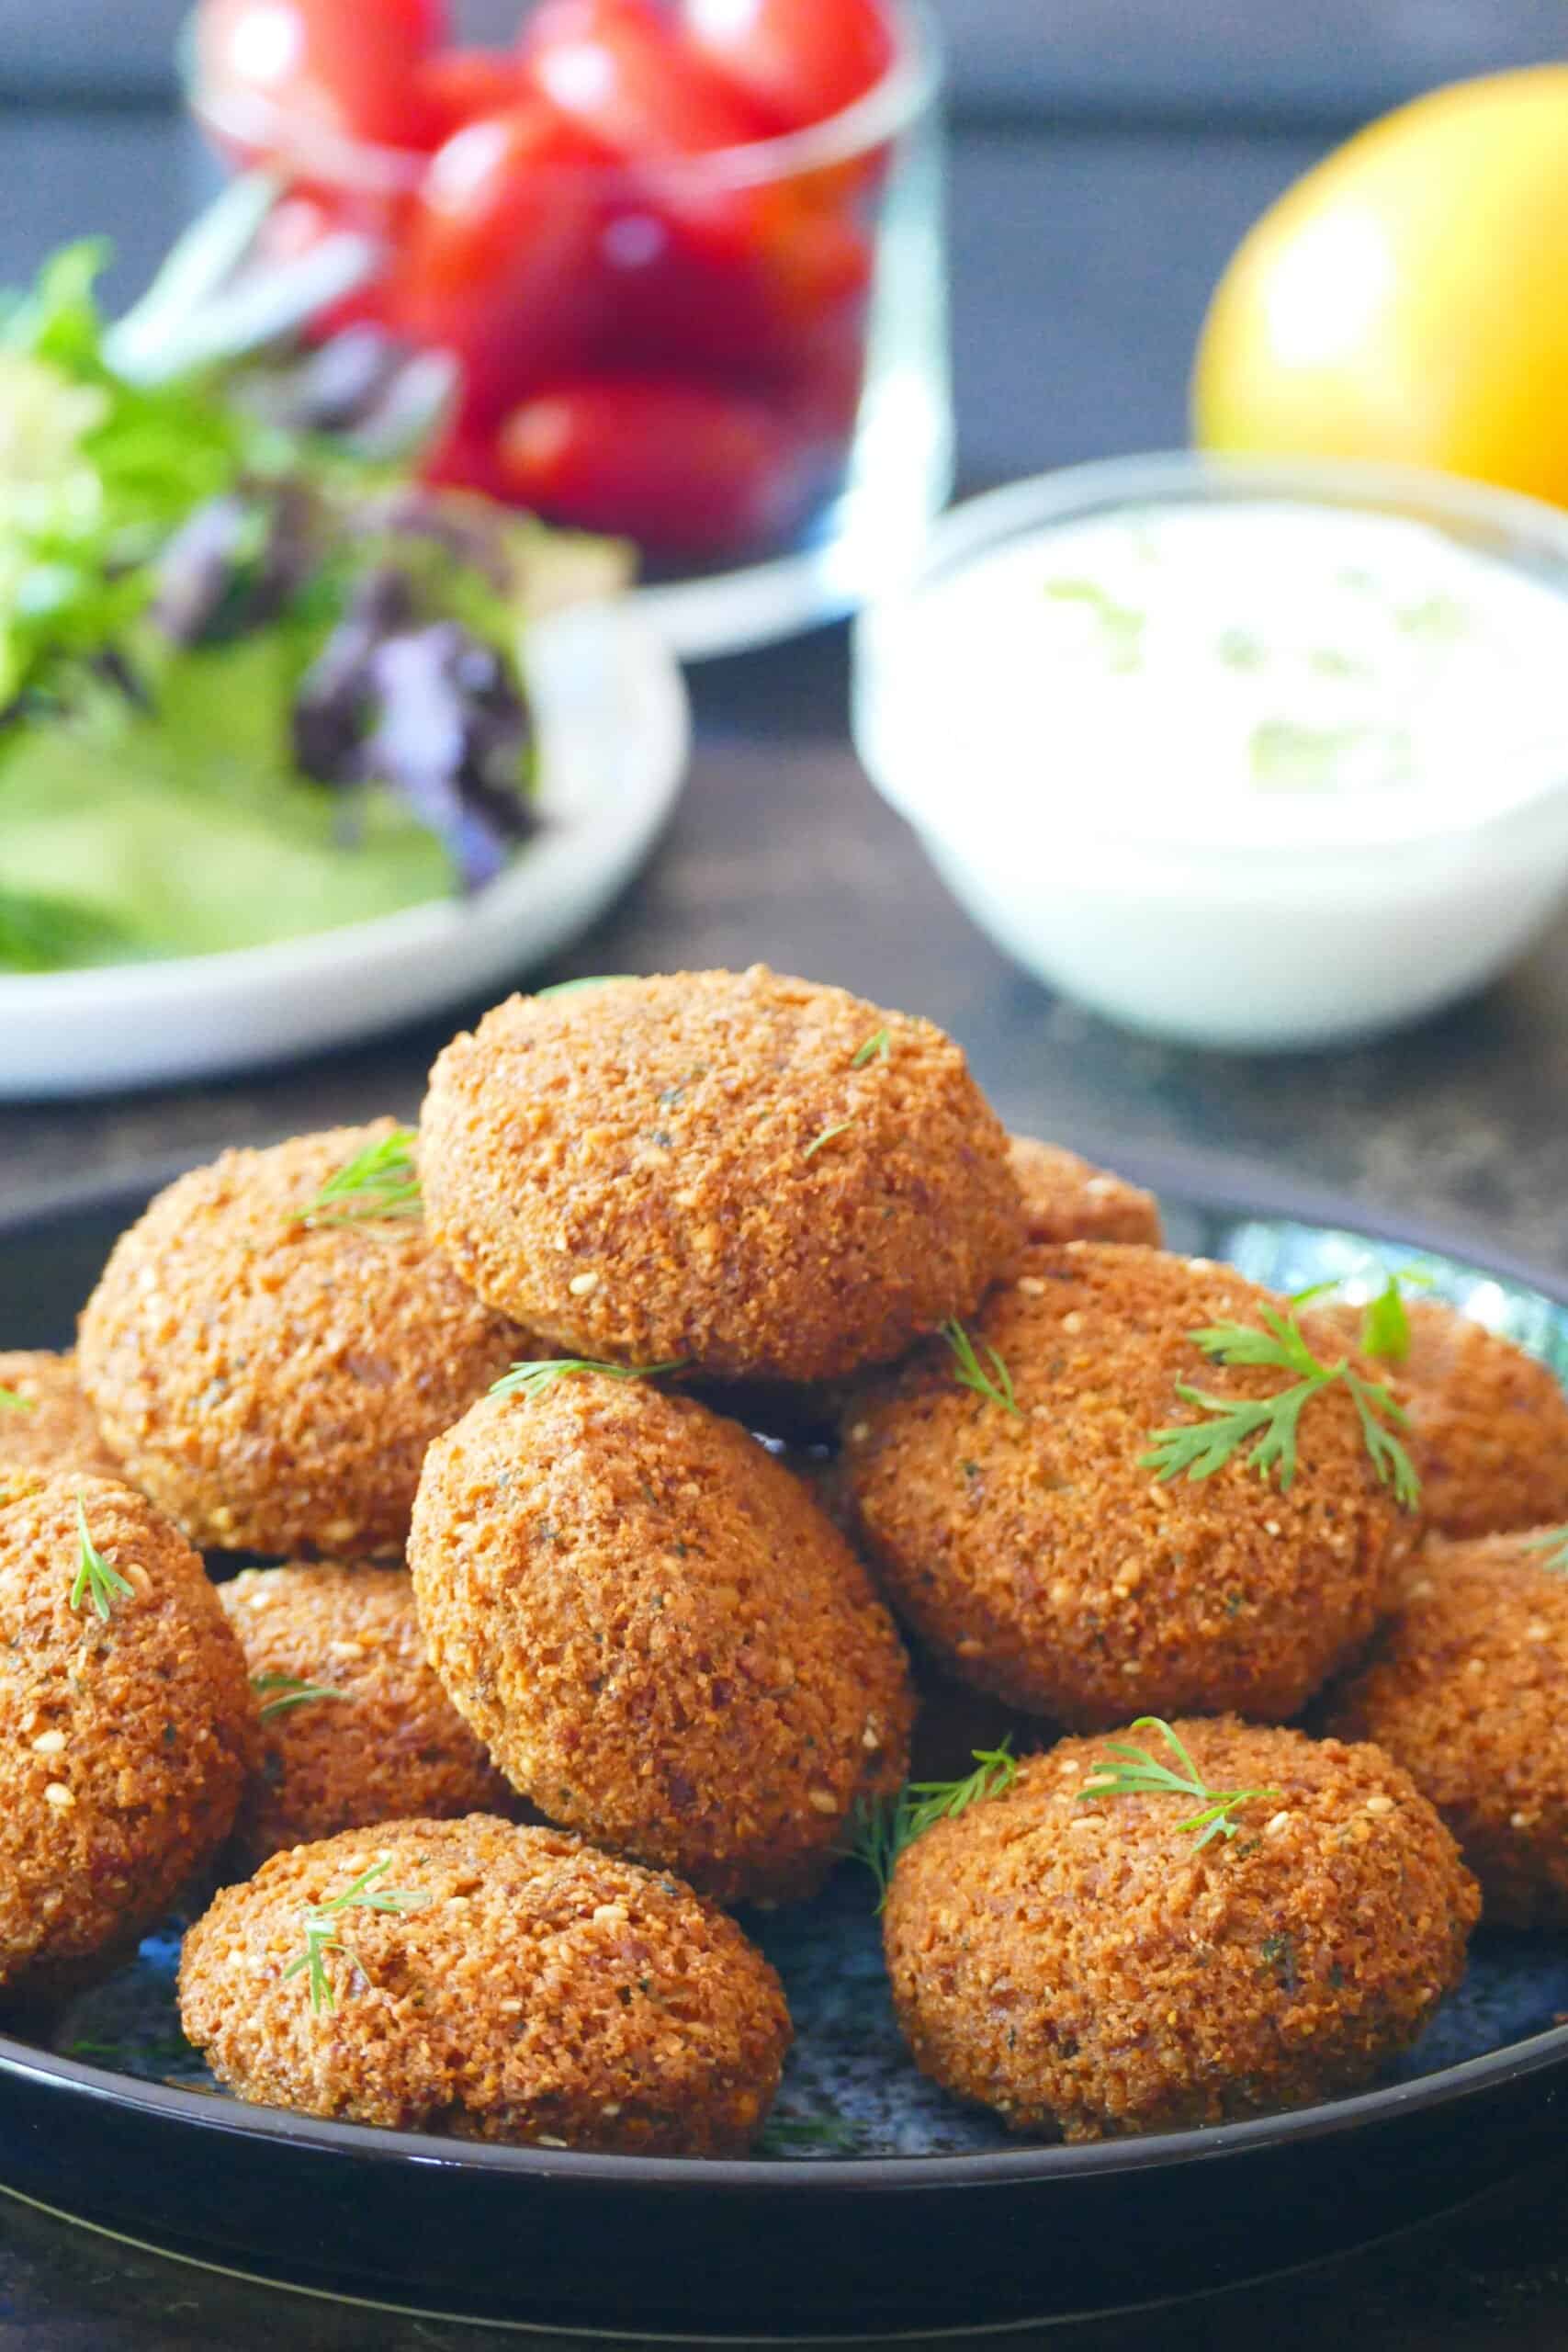 Golden brown, crunchy falafel stacked on a plate with lettuce tomato, white sauce and lemon in background